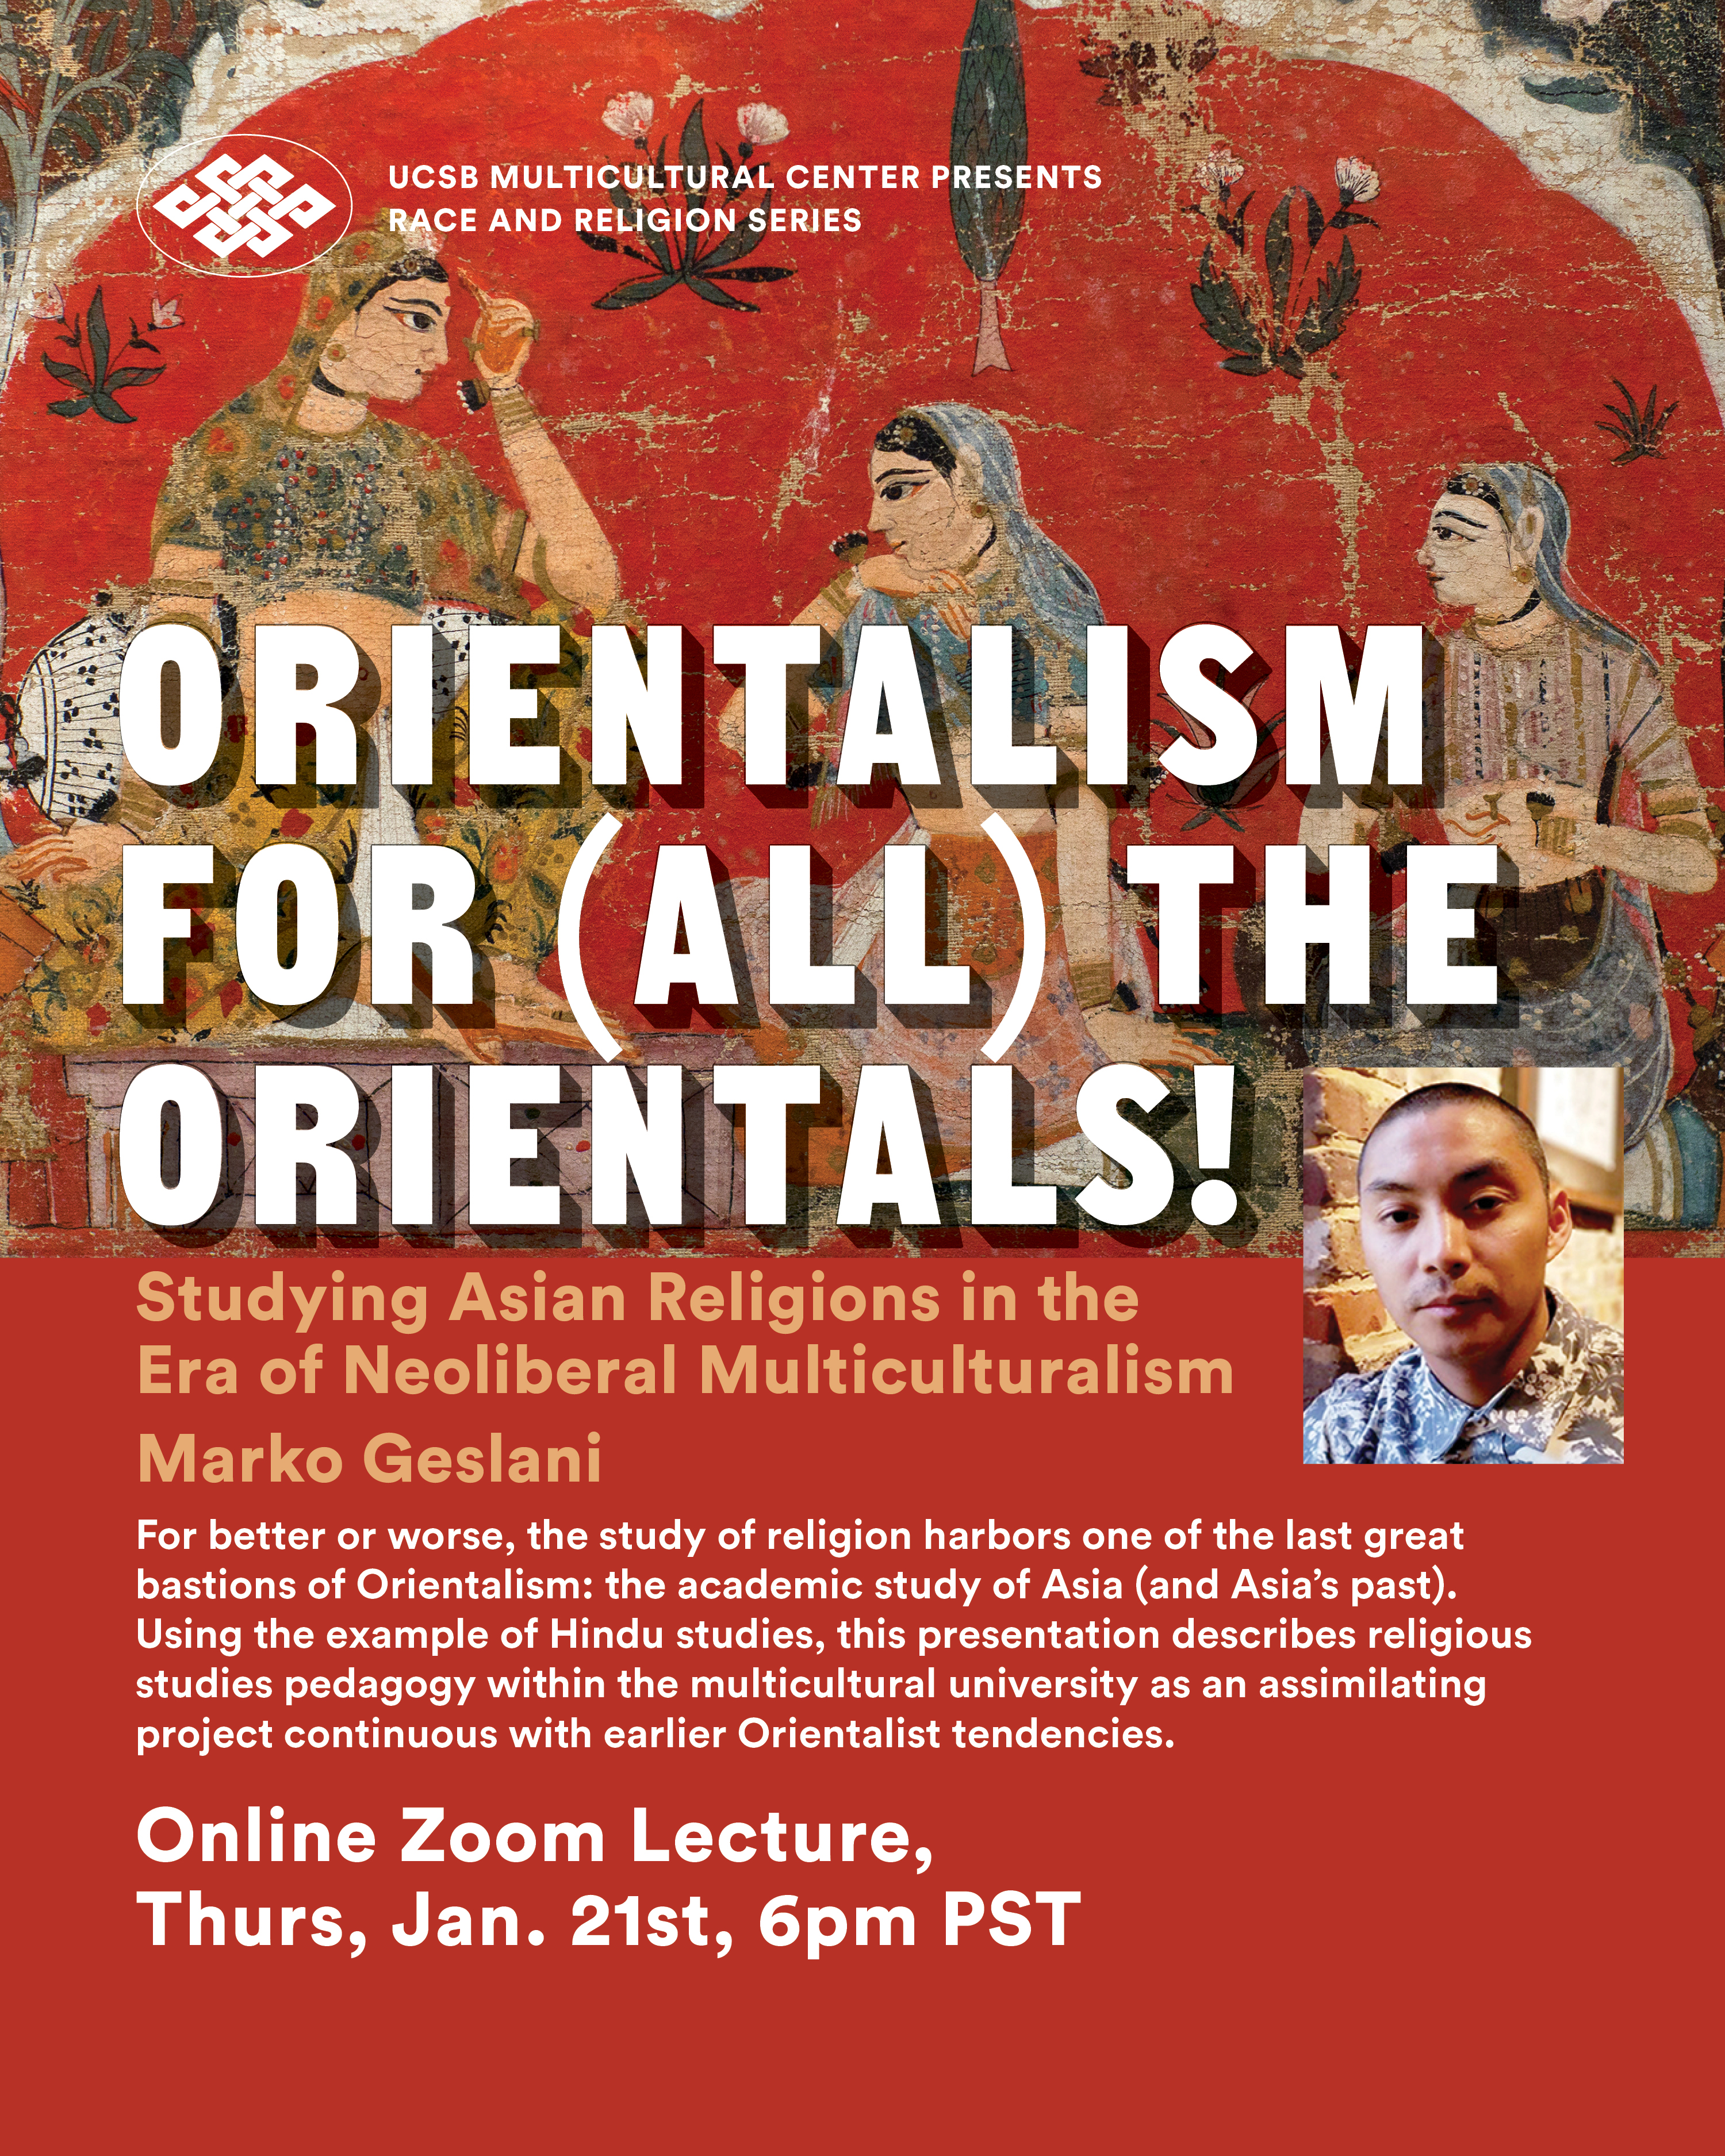 Orientalism for (All) the Orientals! Studying Asian Religions in the Era of Neoliberal Multiculturalism